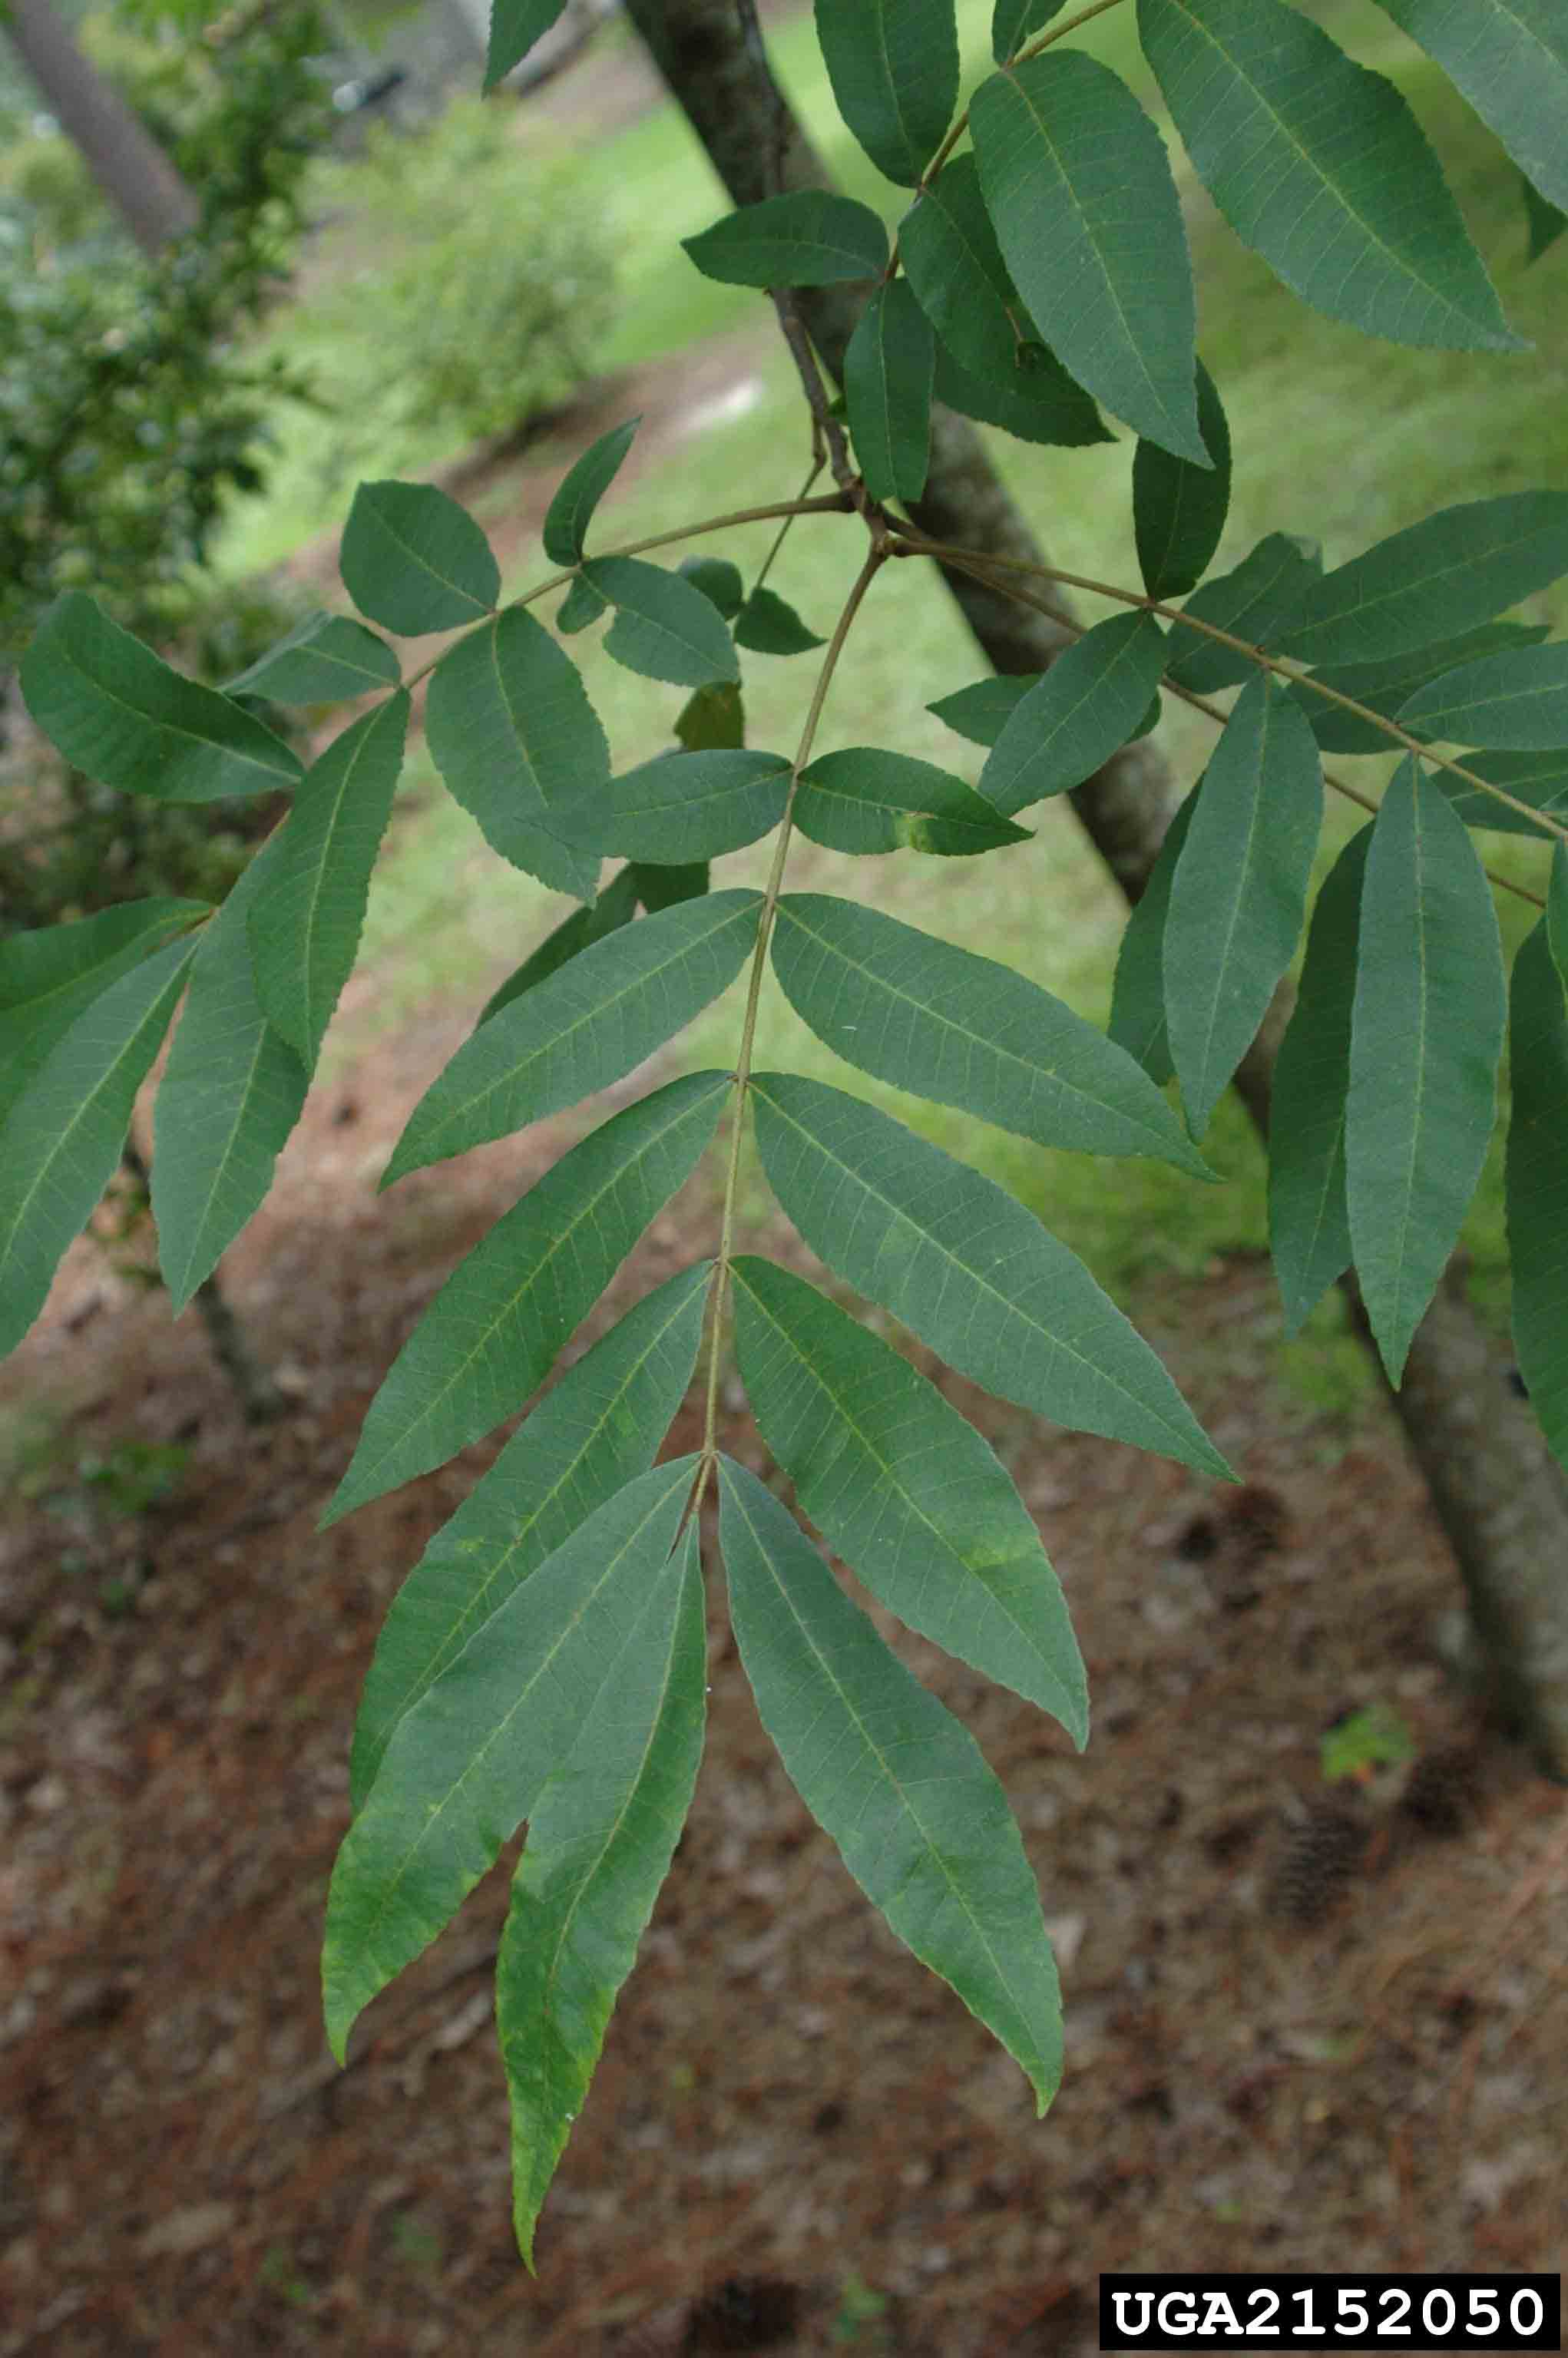 Water hickory pinnately compound leaves